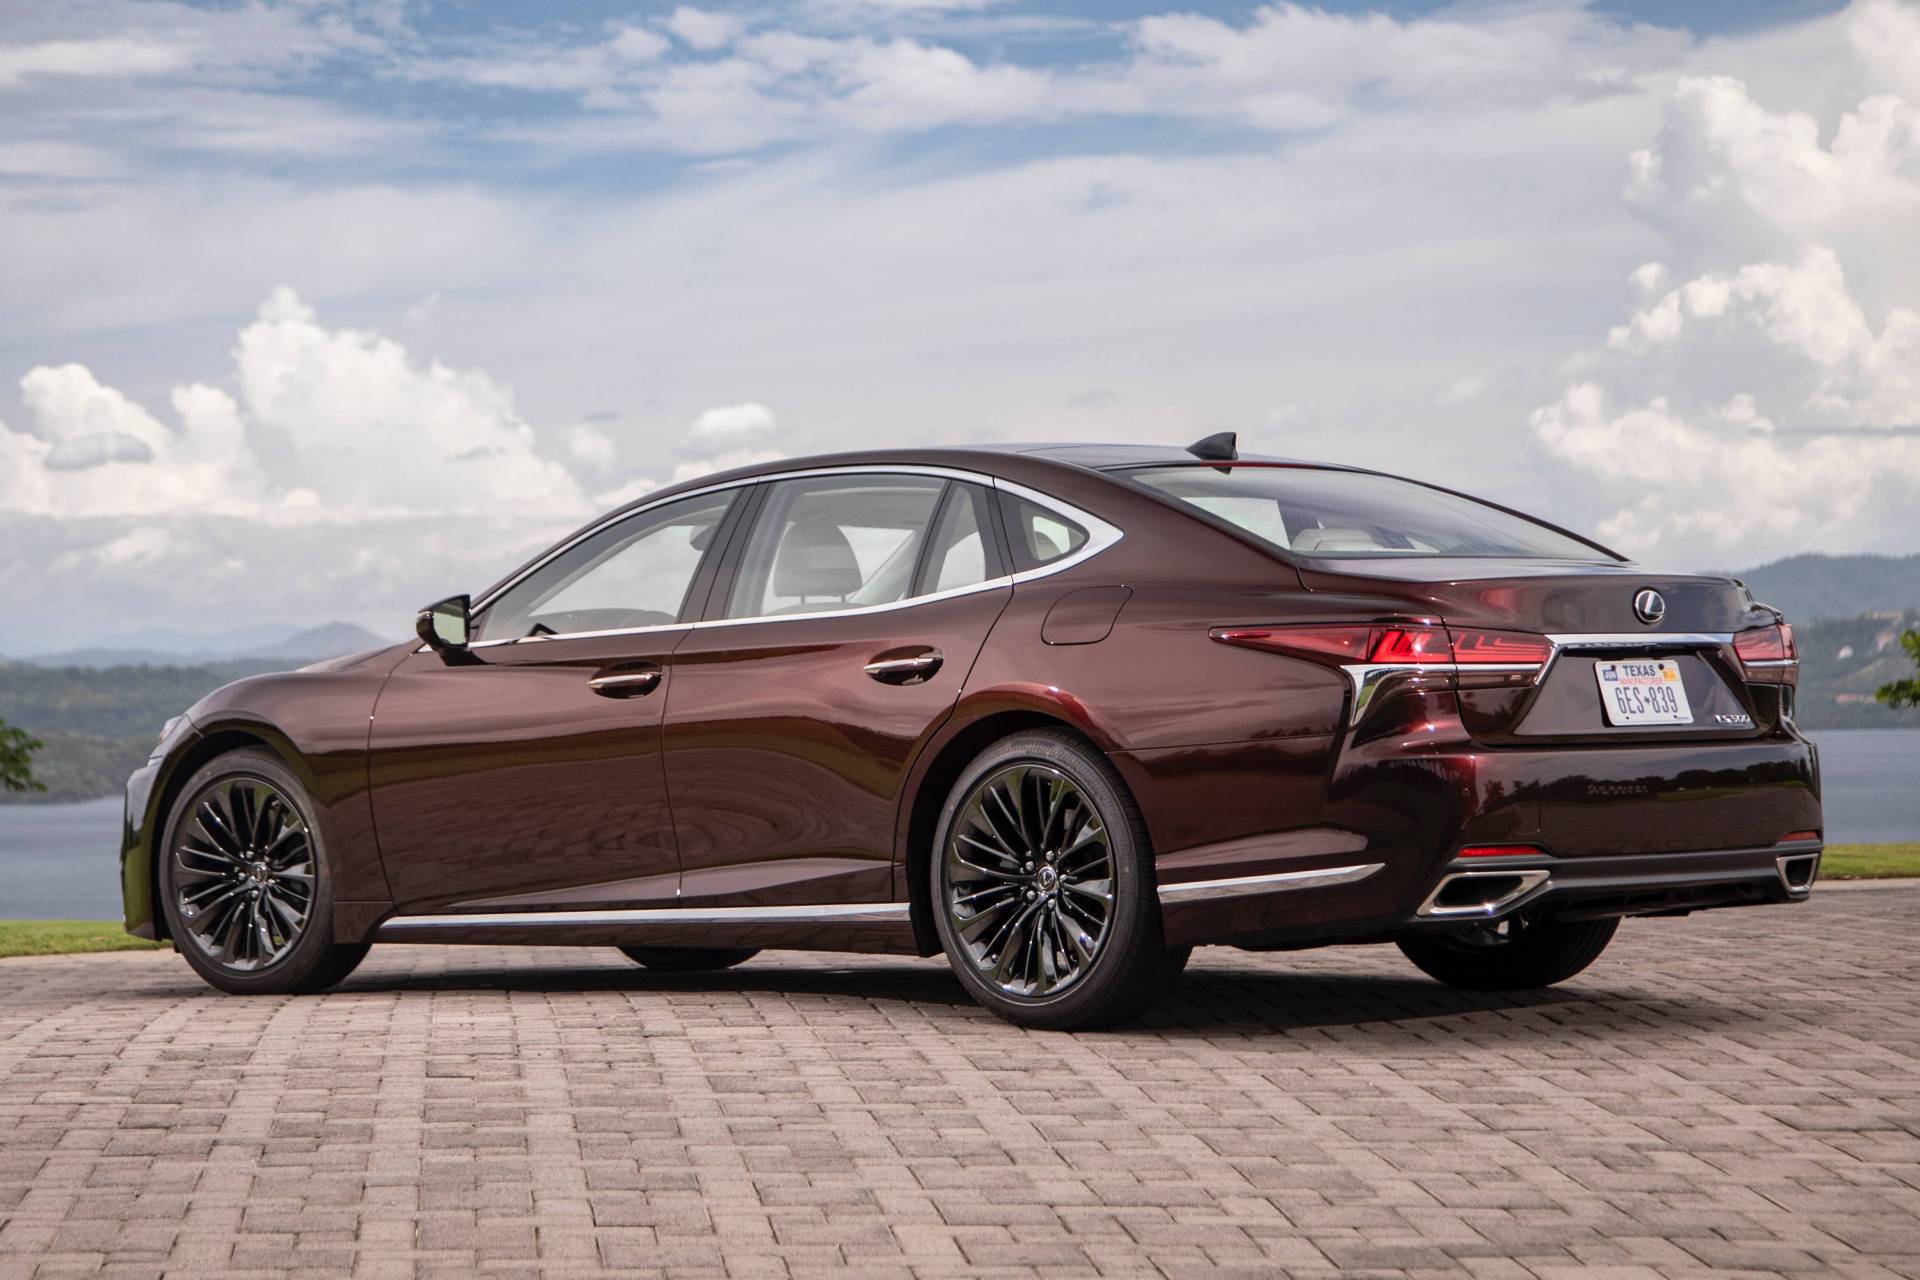 2020 LS 500 Is First Lexus Sedan To Get The Inspiration Series Treatment |  Carscoops